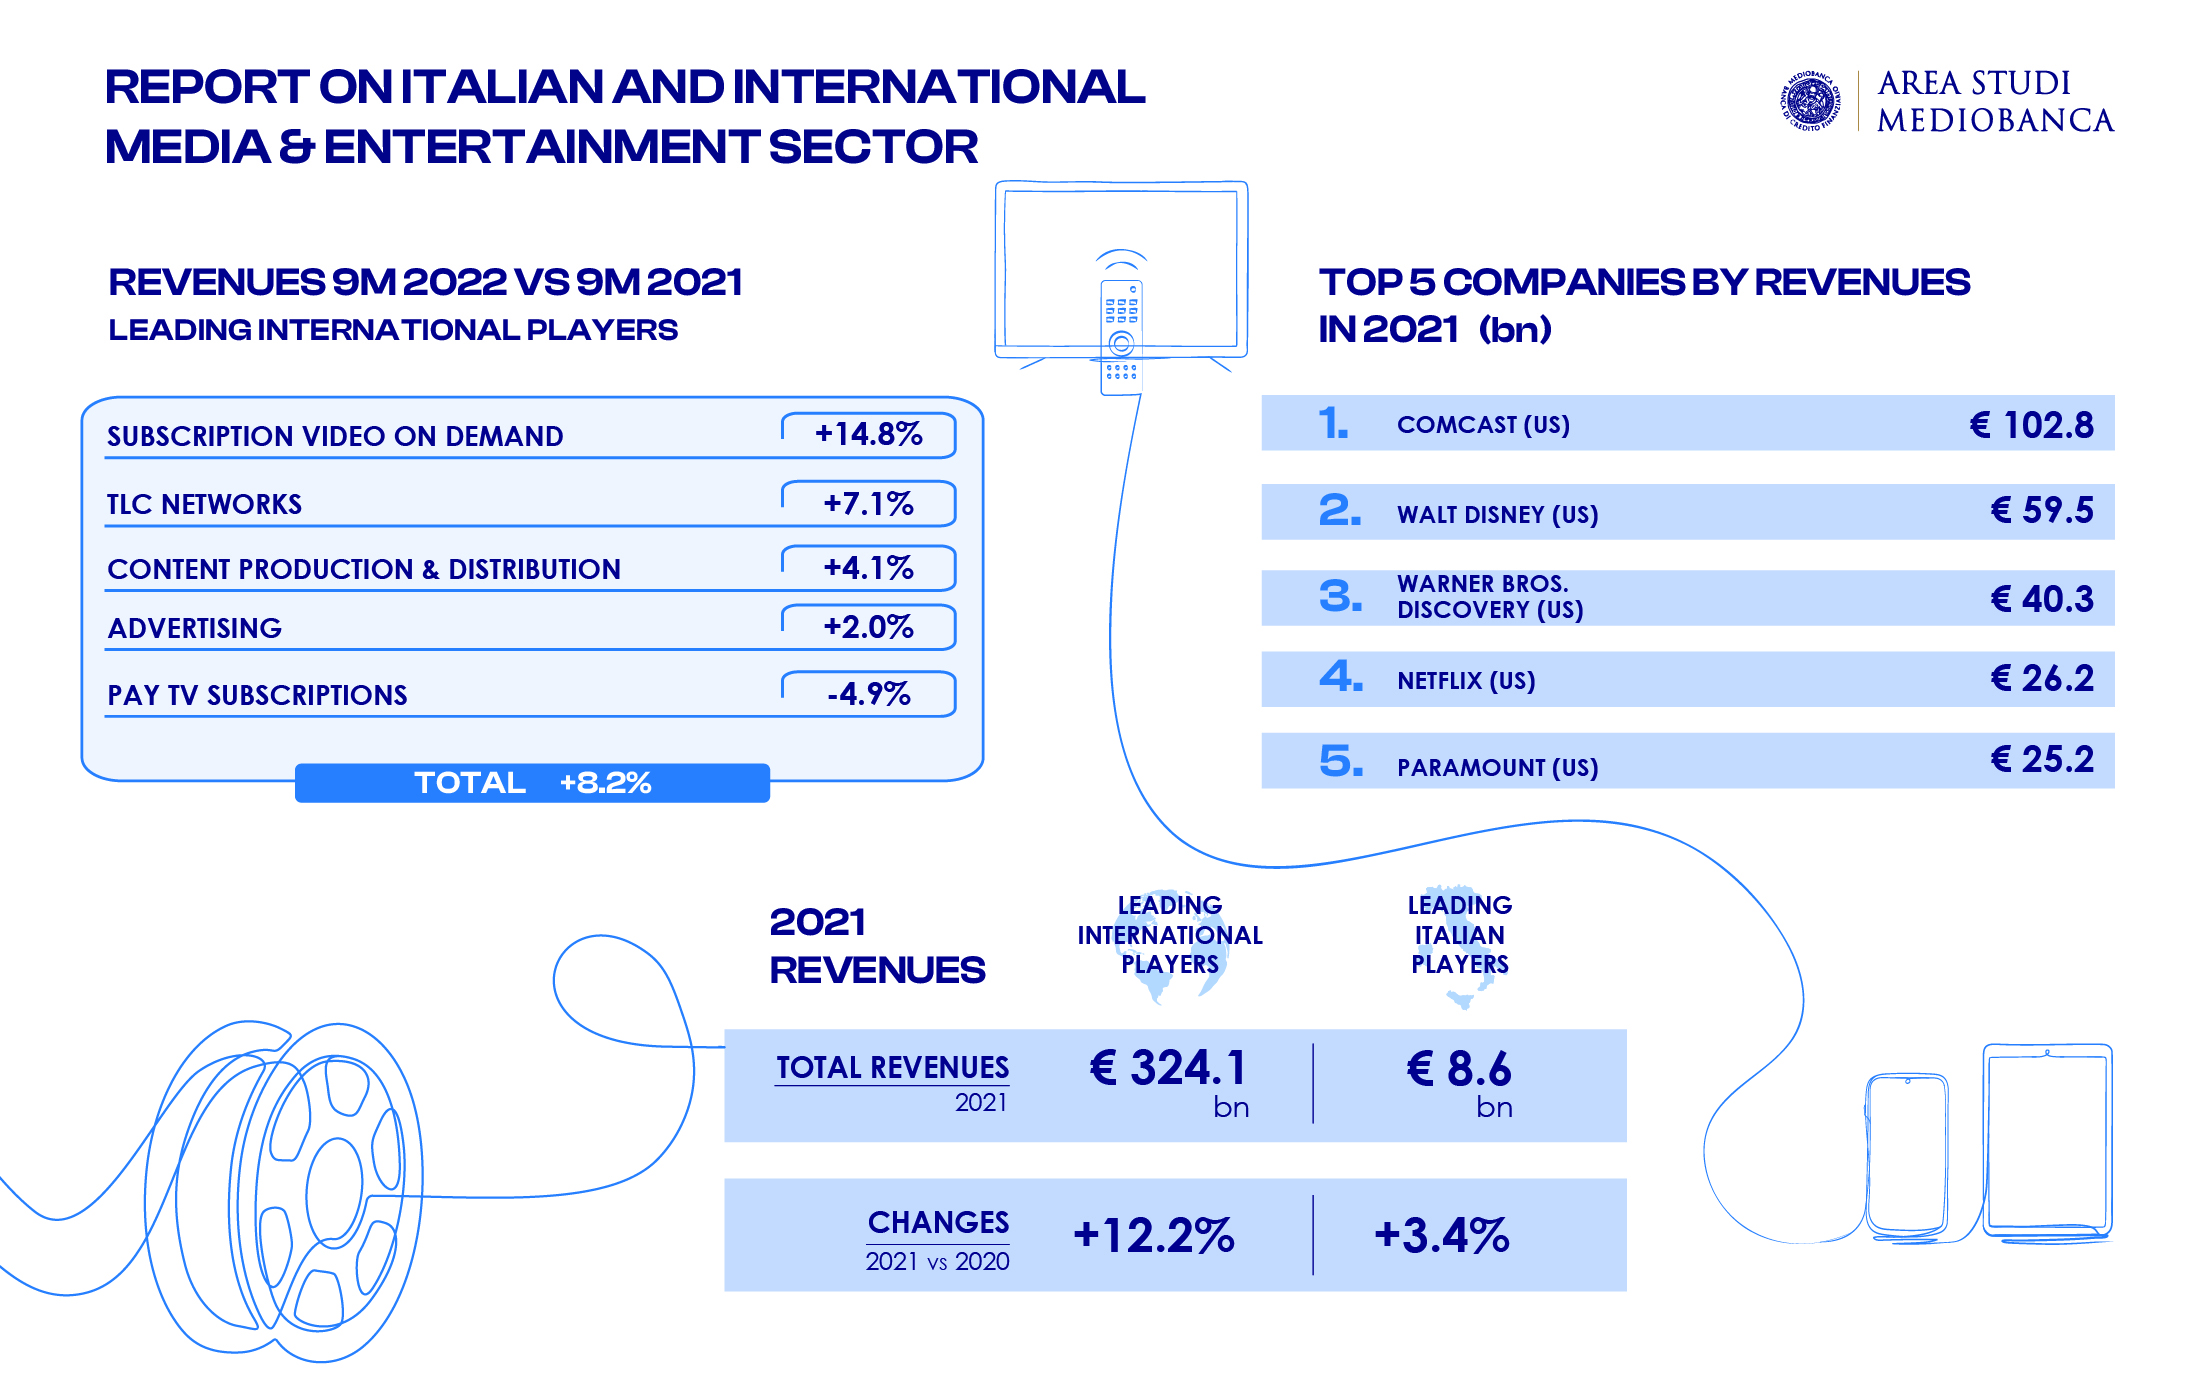 Image for The Mediobanca Research Area has presented the new version of its Media & Entertainment Report - 2023 